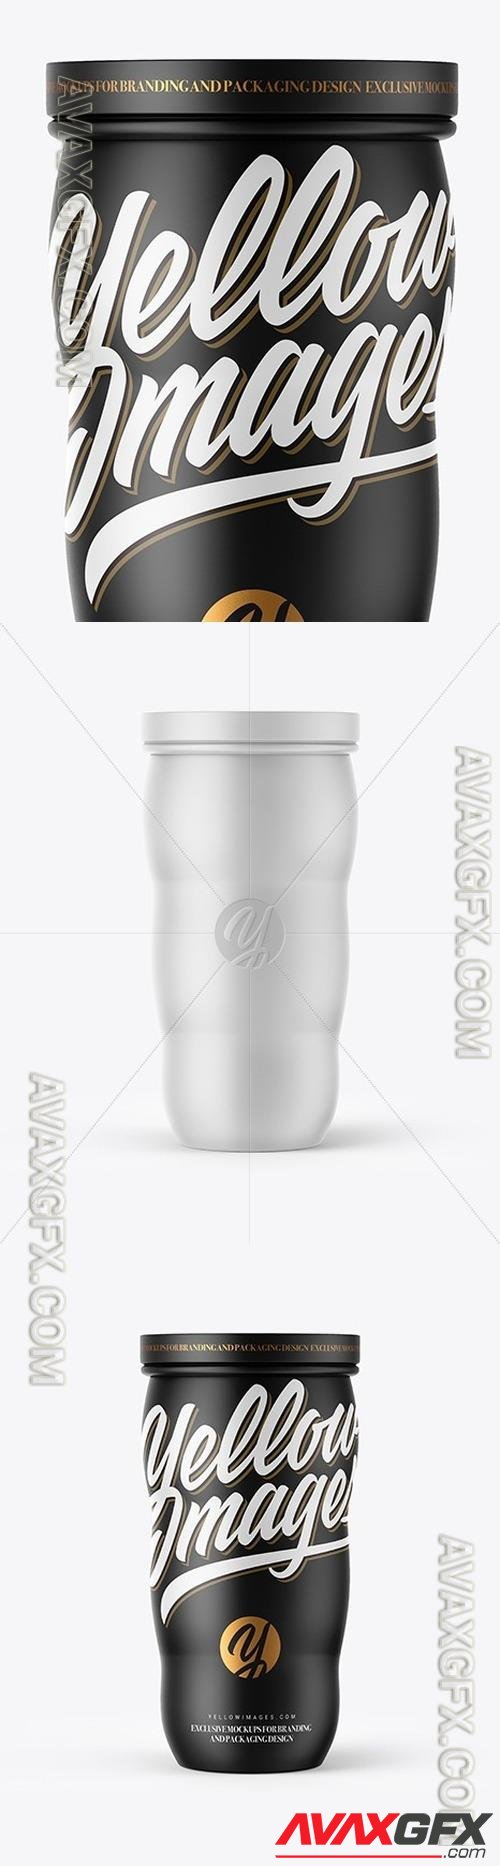 Matte Thermo Cup Mockup 48035 TIF